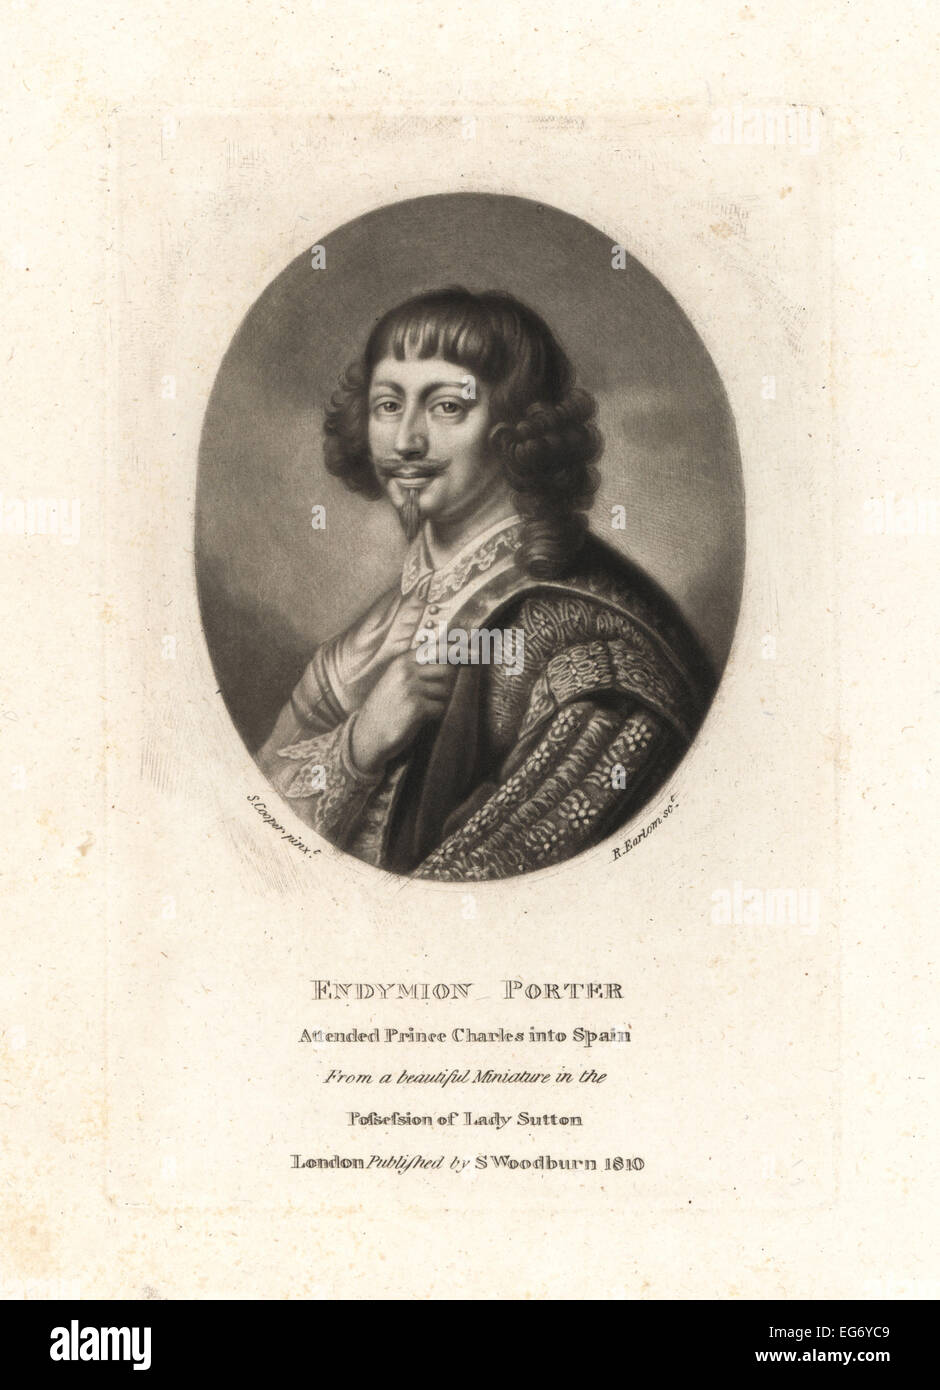 Endymion Porter, Royalist and diplomat, attended Prince Charles into Spain, died 1649. Stock Photo